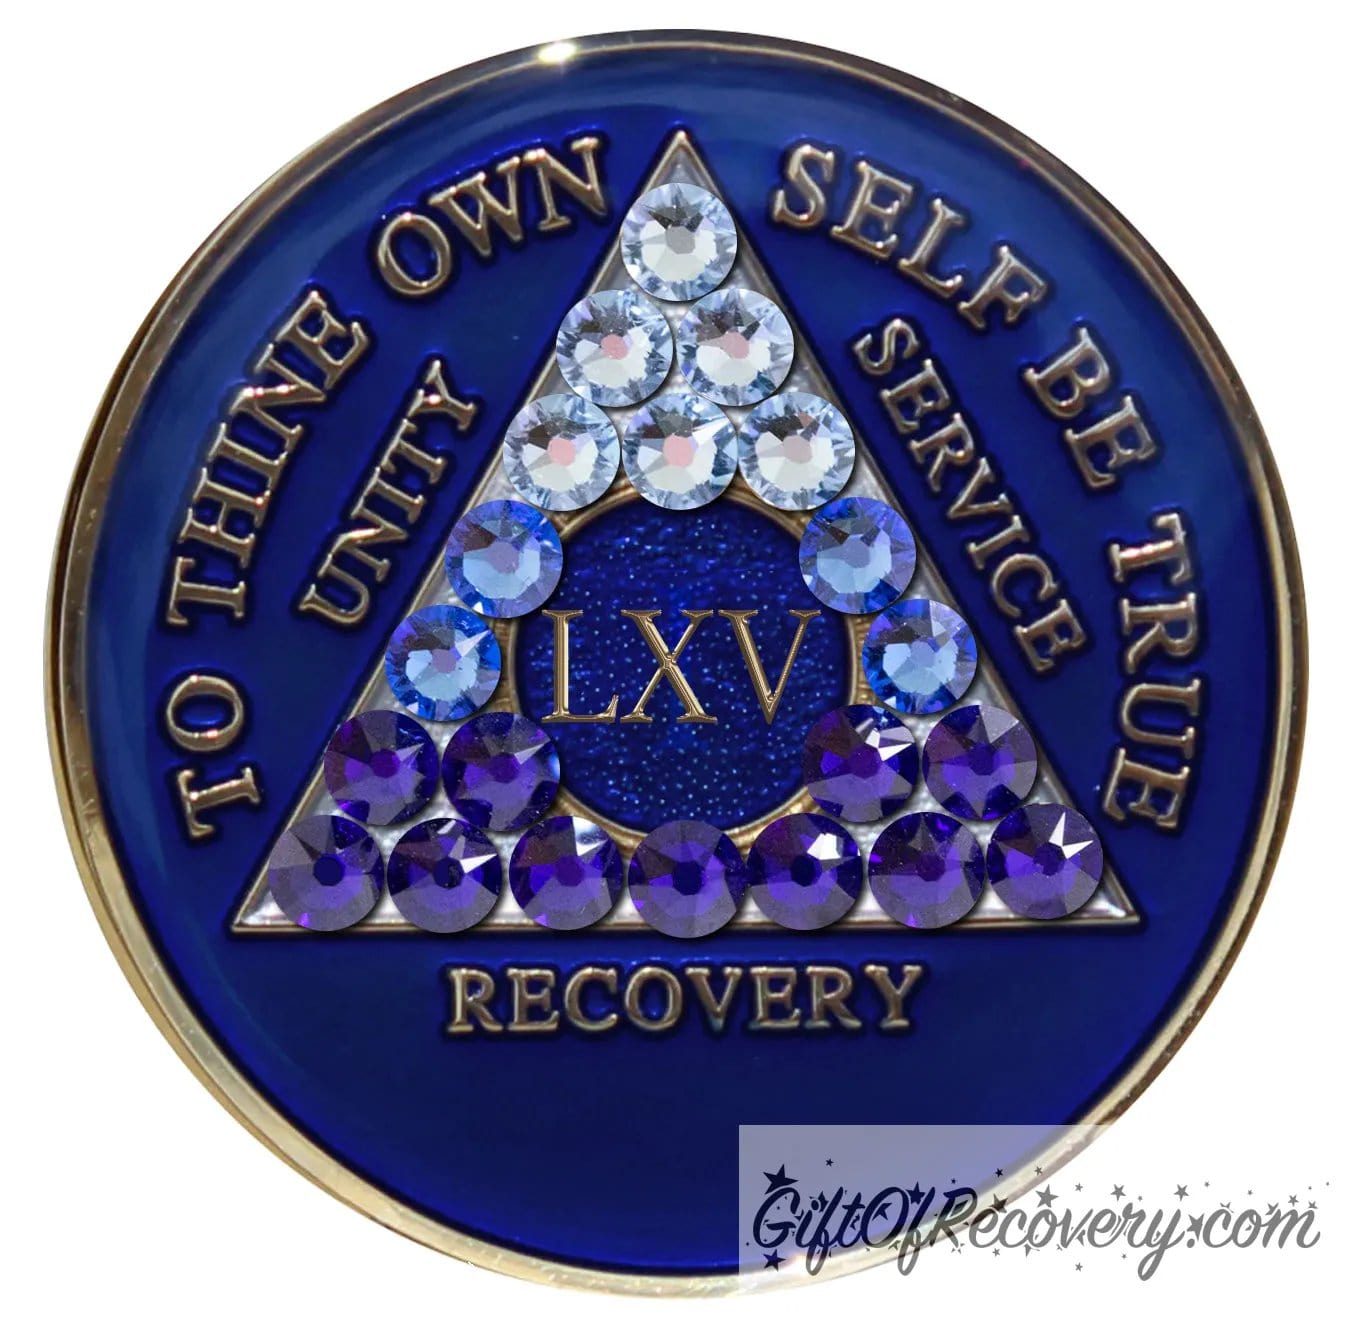 65 year Big Book Blue AA medallion with 21 genuine crystals forming the triangle, going from light to dark blue to represent transitions in your recovery journey, the center circle is blue sparkle, with the roman numeral, AA moto and rim in 14k gold plated brass and resin sealed for a glossy finish.